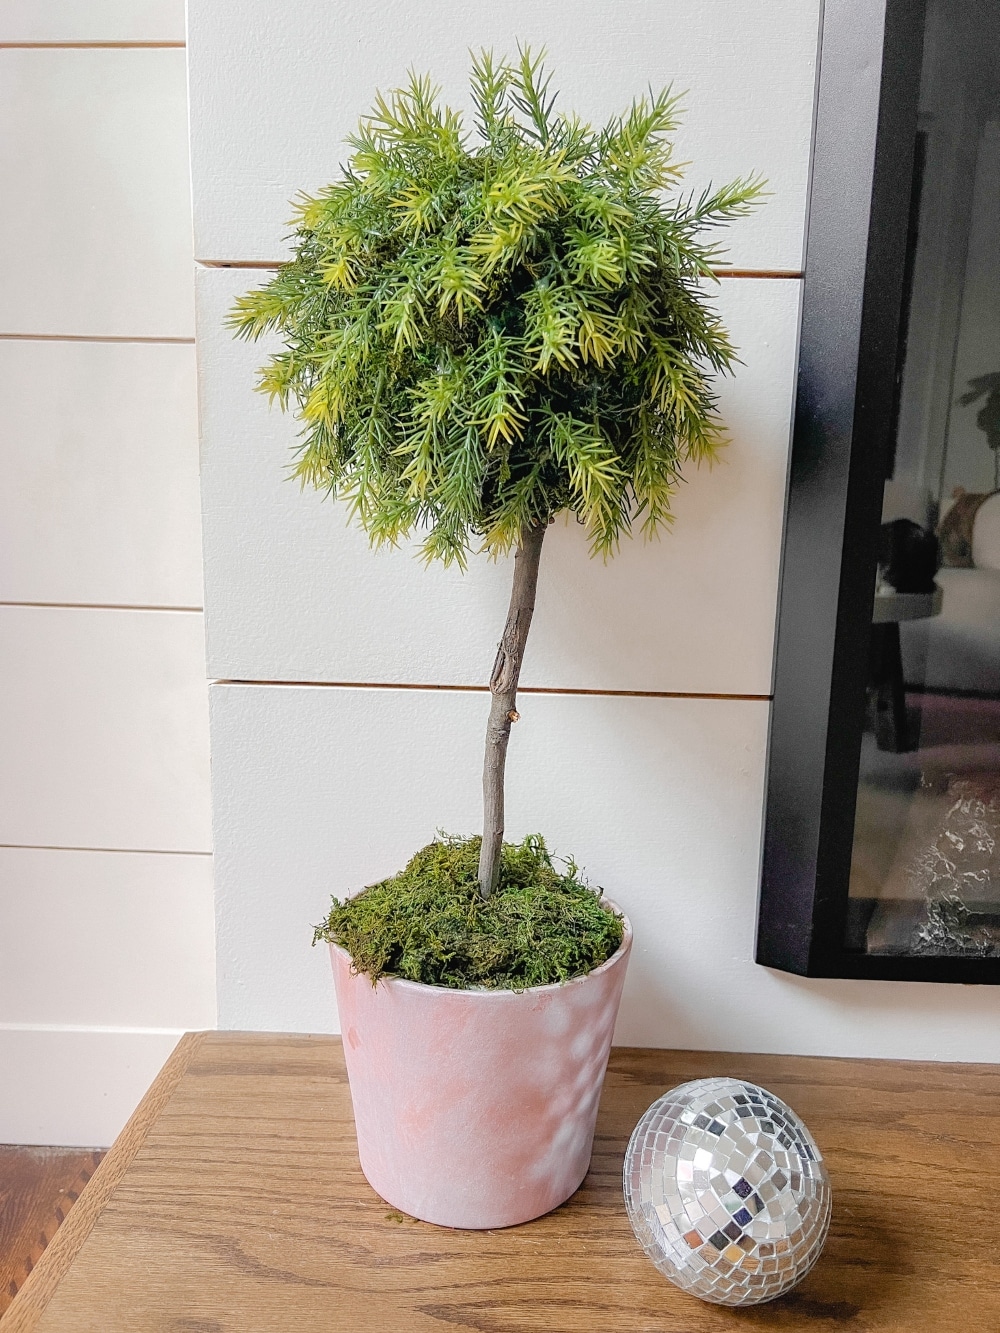 DIY Spring Topiary and Aged Pot. A topiary is the perfect addition to your spring decor. Put it on your kitchen counter, on your mantel or as a centerpiece on your dining room table. I also share how to make a aged pot to plant it in!